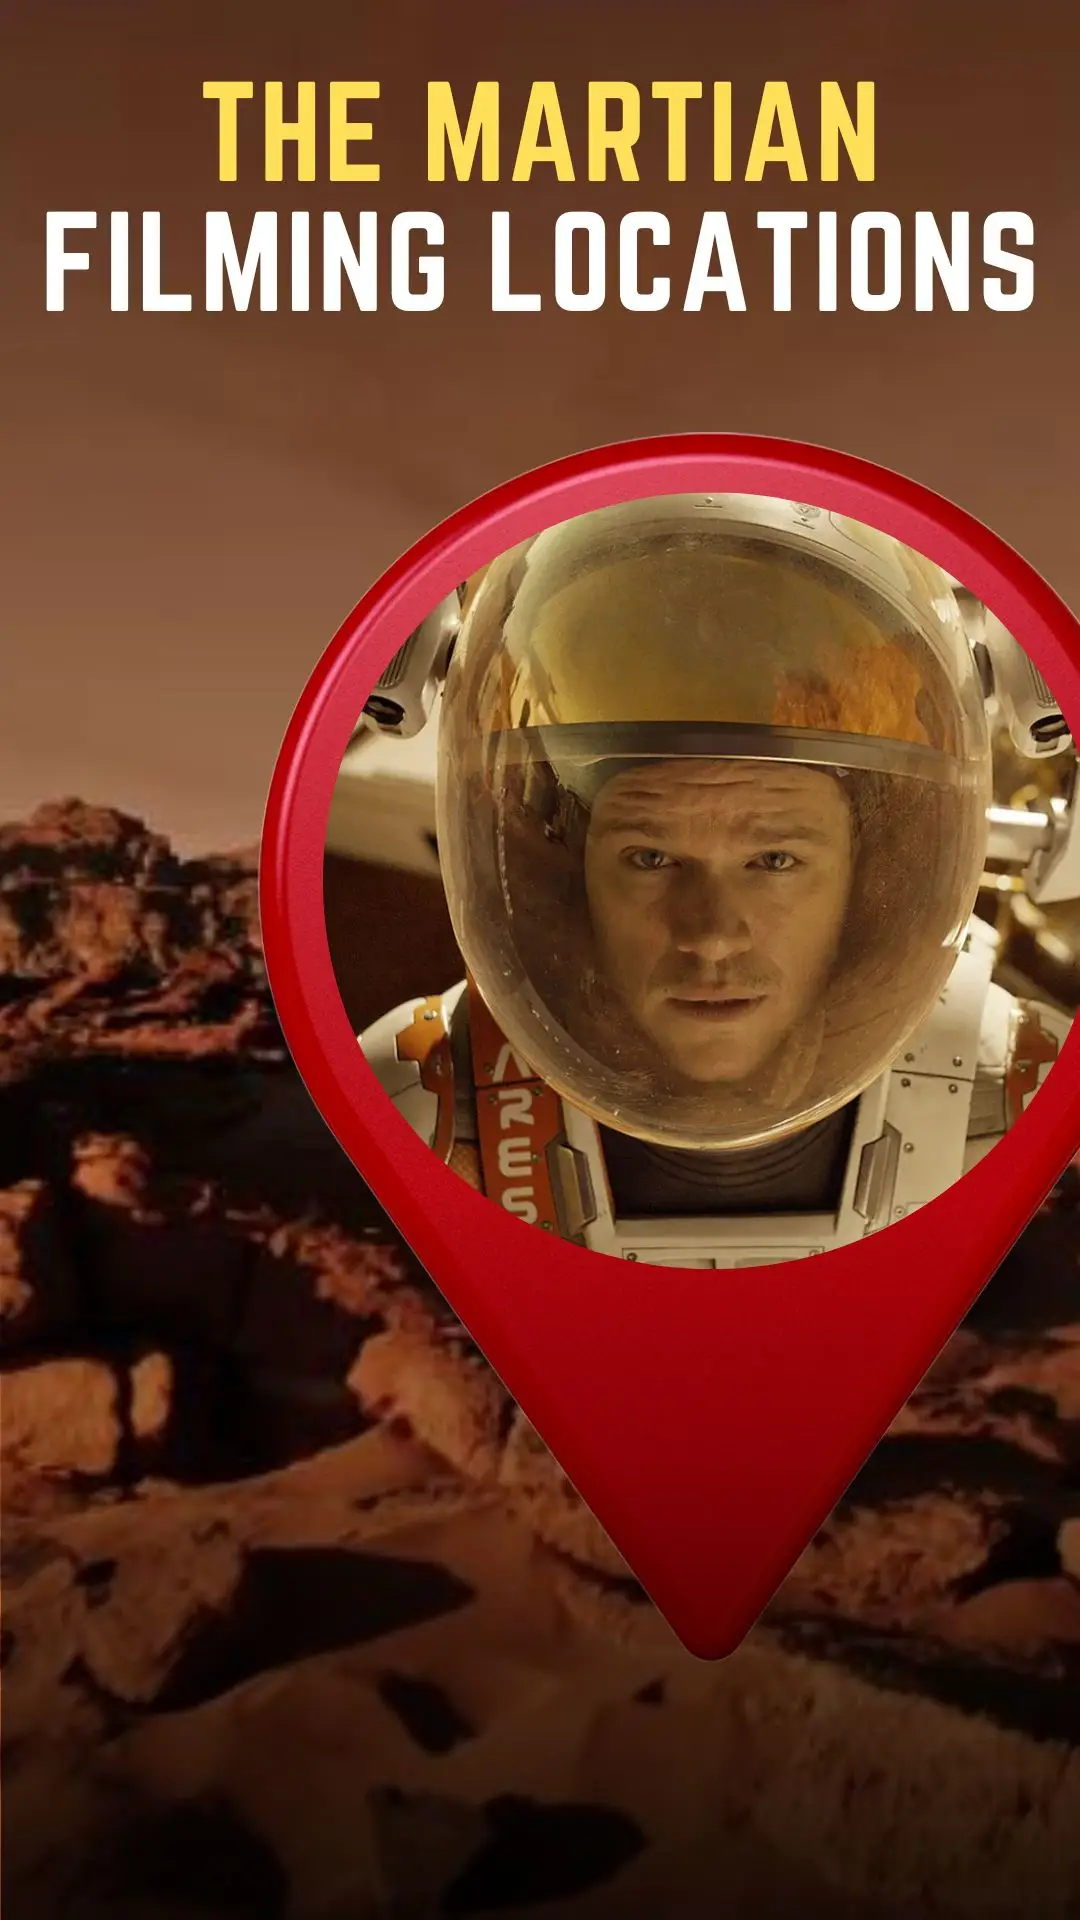 The Martian Filming Locations